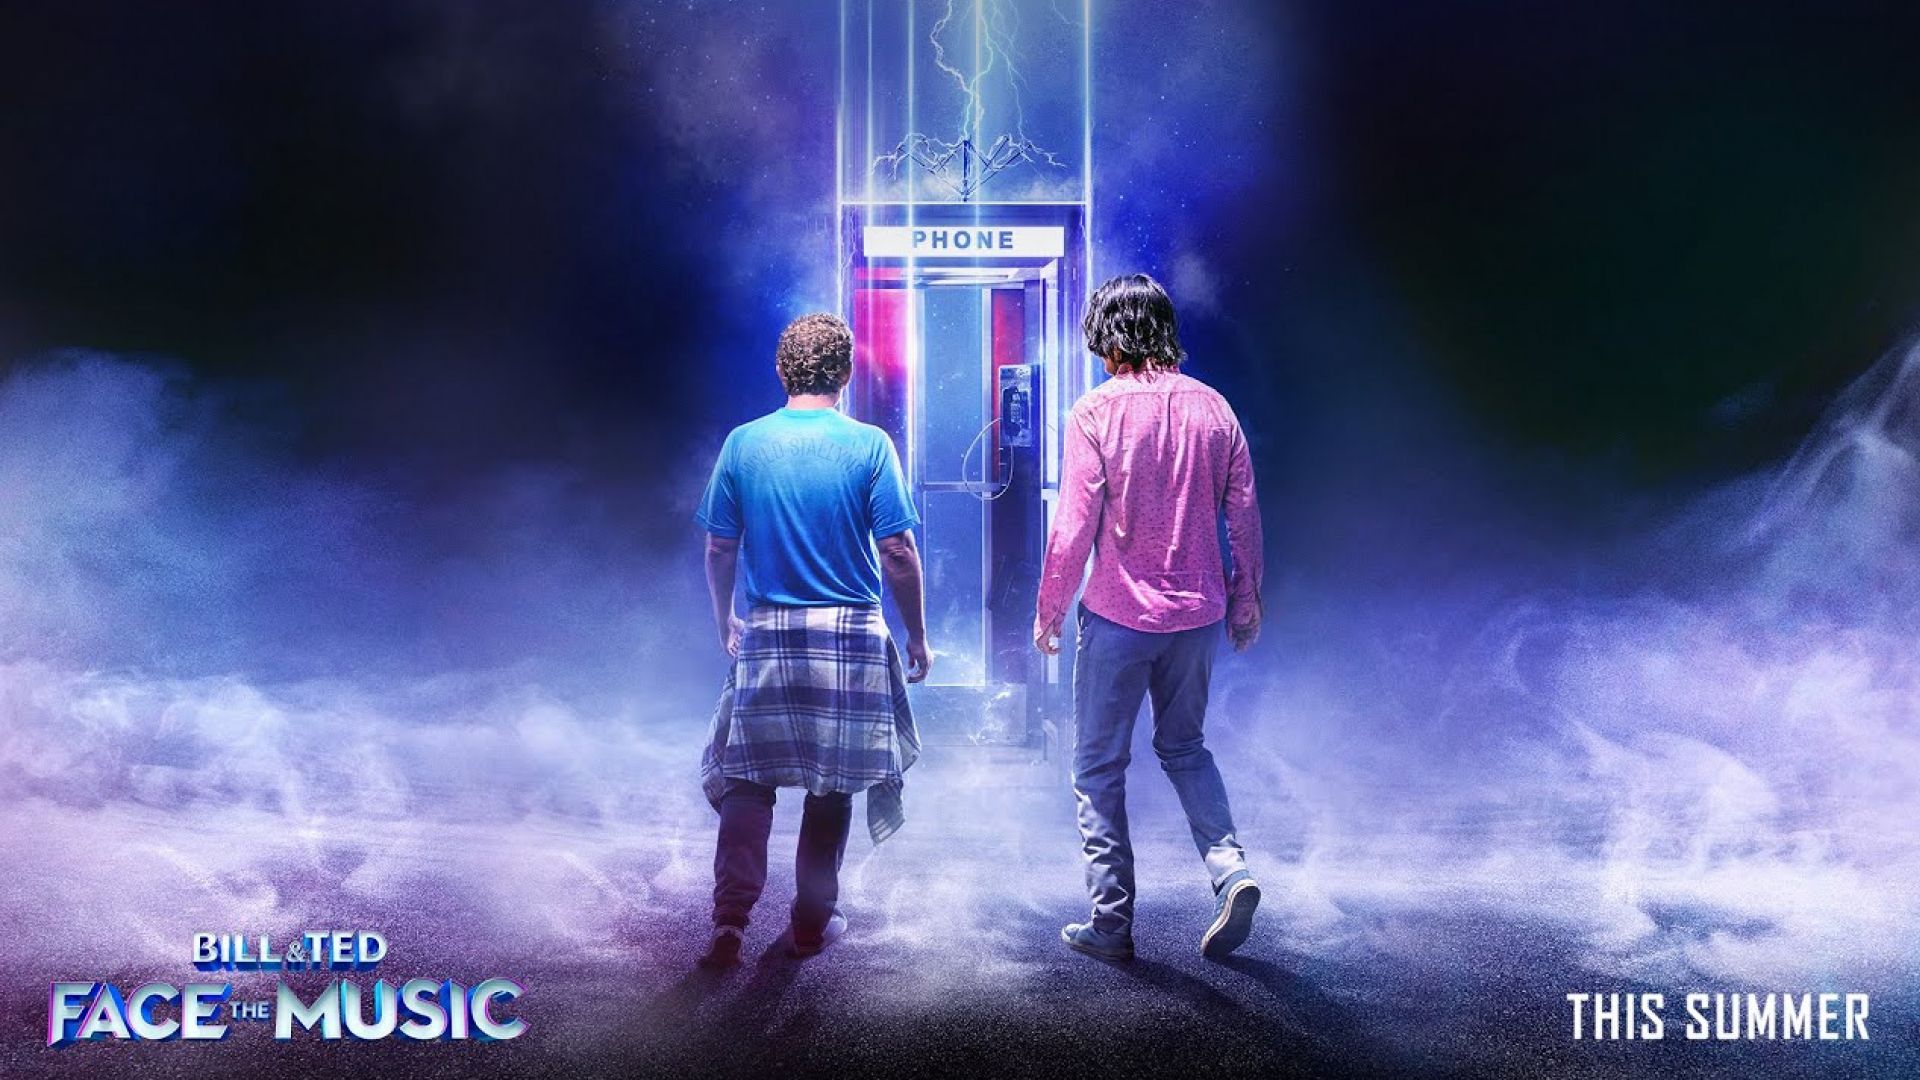 BILL &amp; TED FACE THE MUSIC Official Trailer #1 (2020)